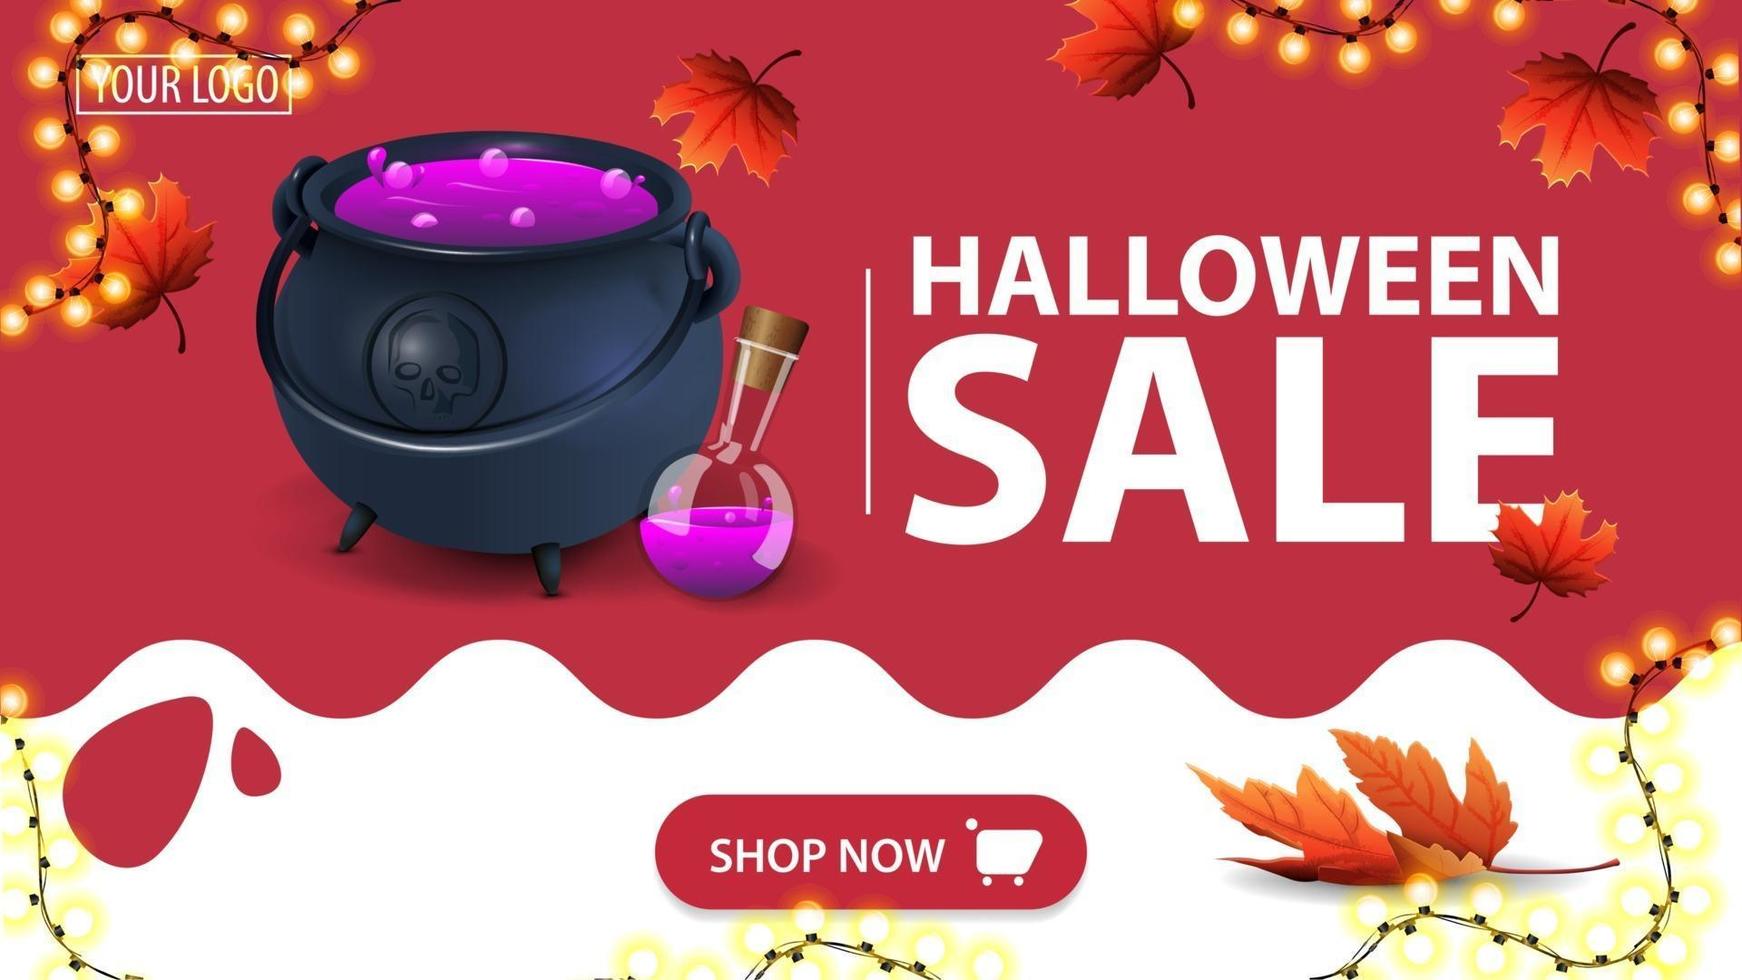 Halloween sale, red discount banner with autumn leafs, button, garland and witch's cauldron with potion vector